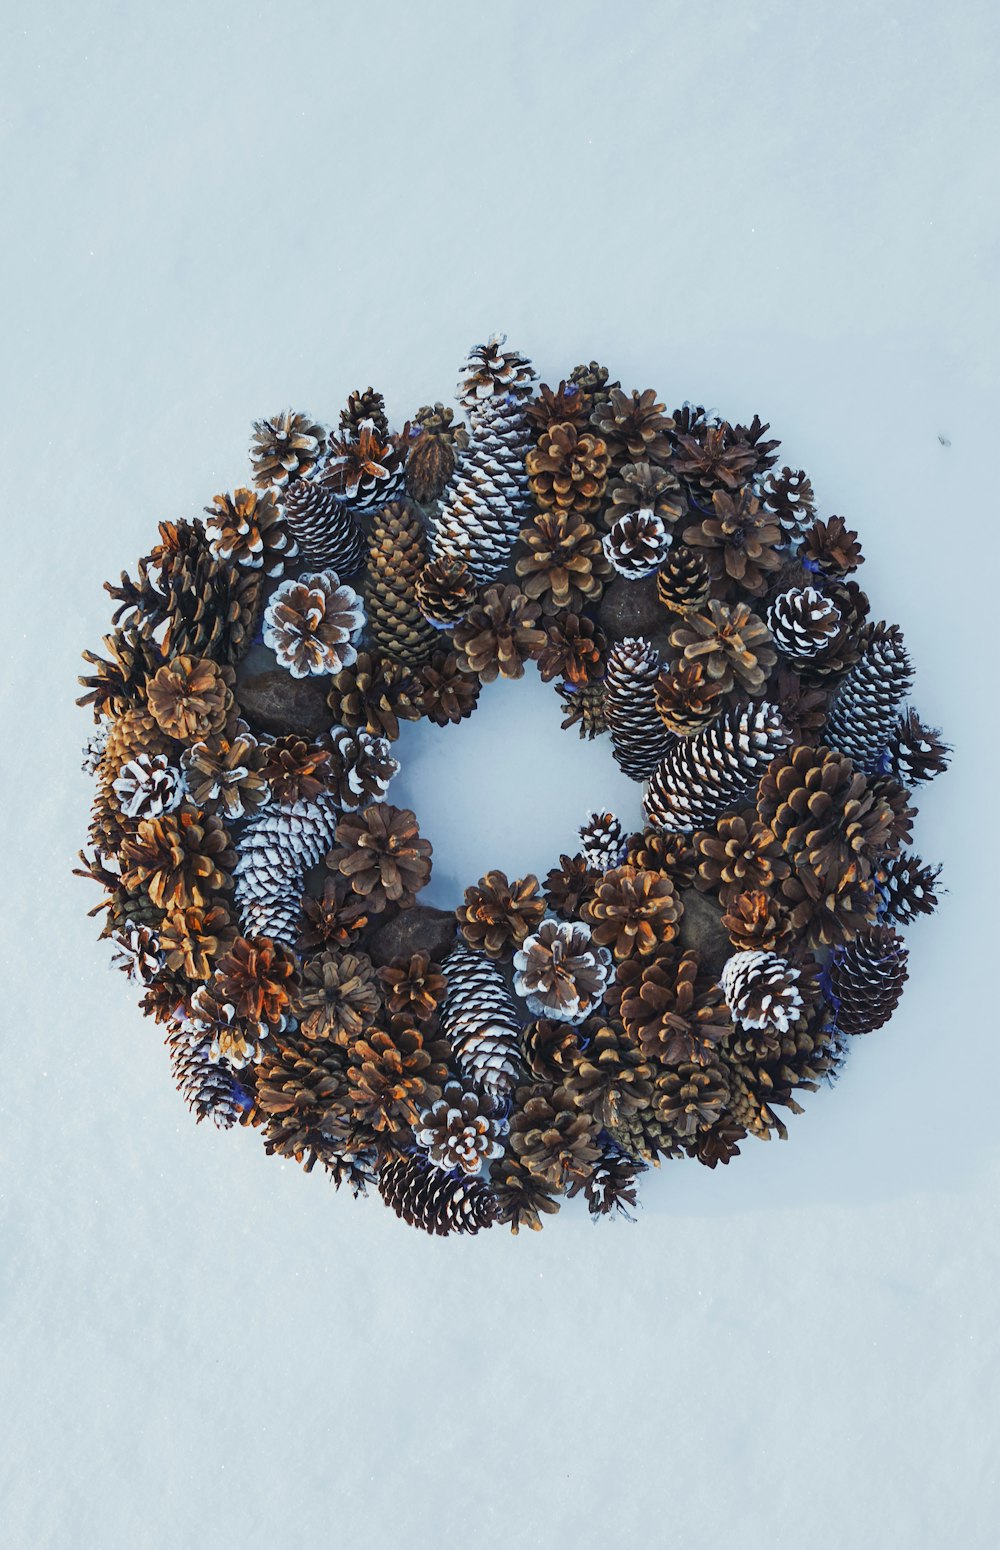 a wreath made of pine cones and cones in the snow